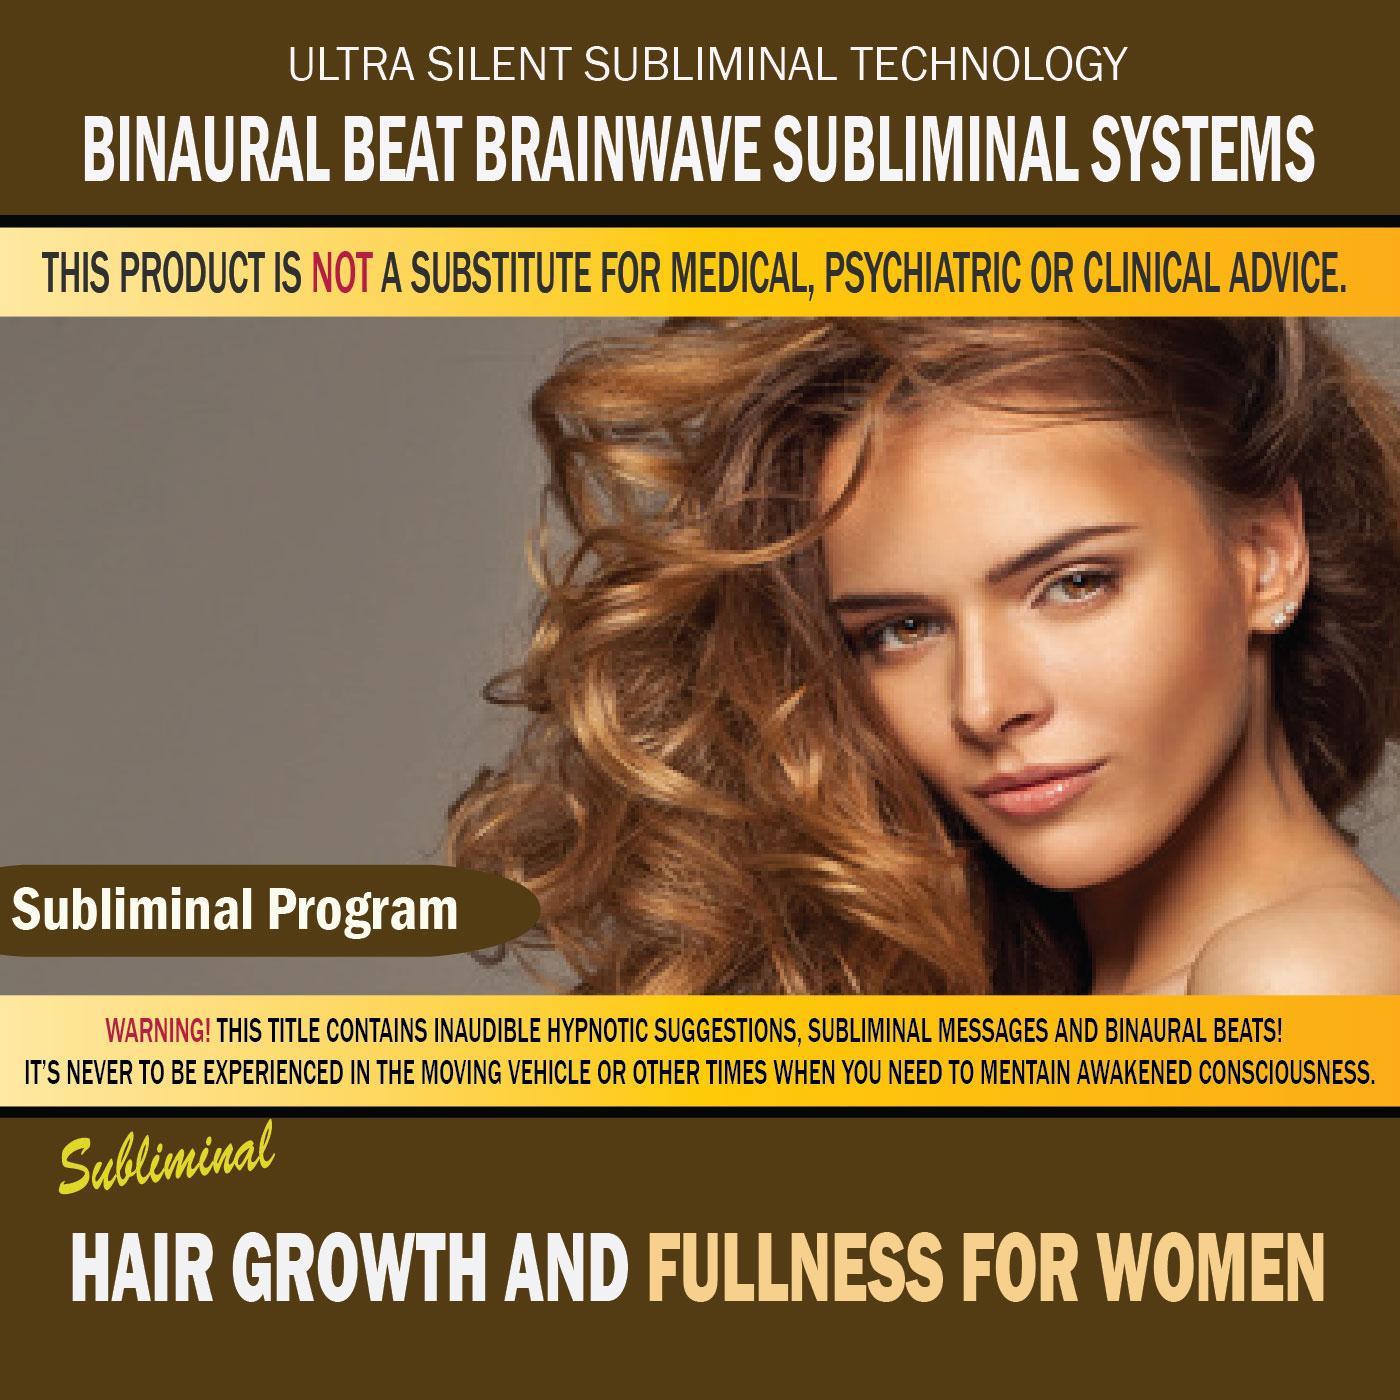 Hair Growth and Fullness for Women